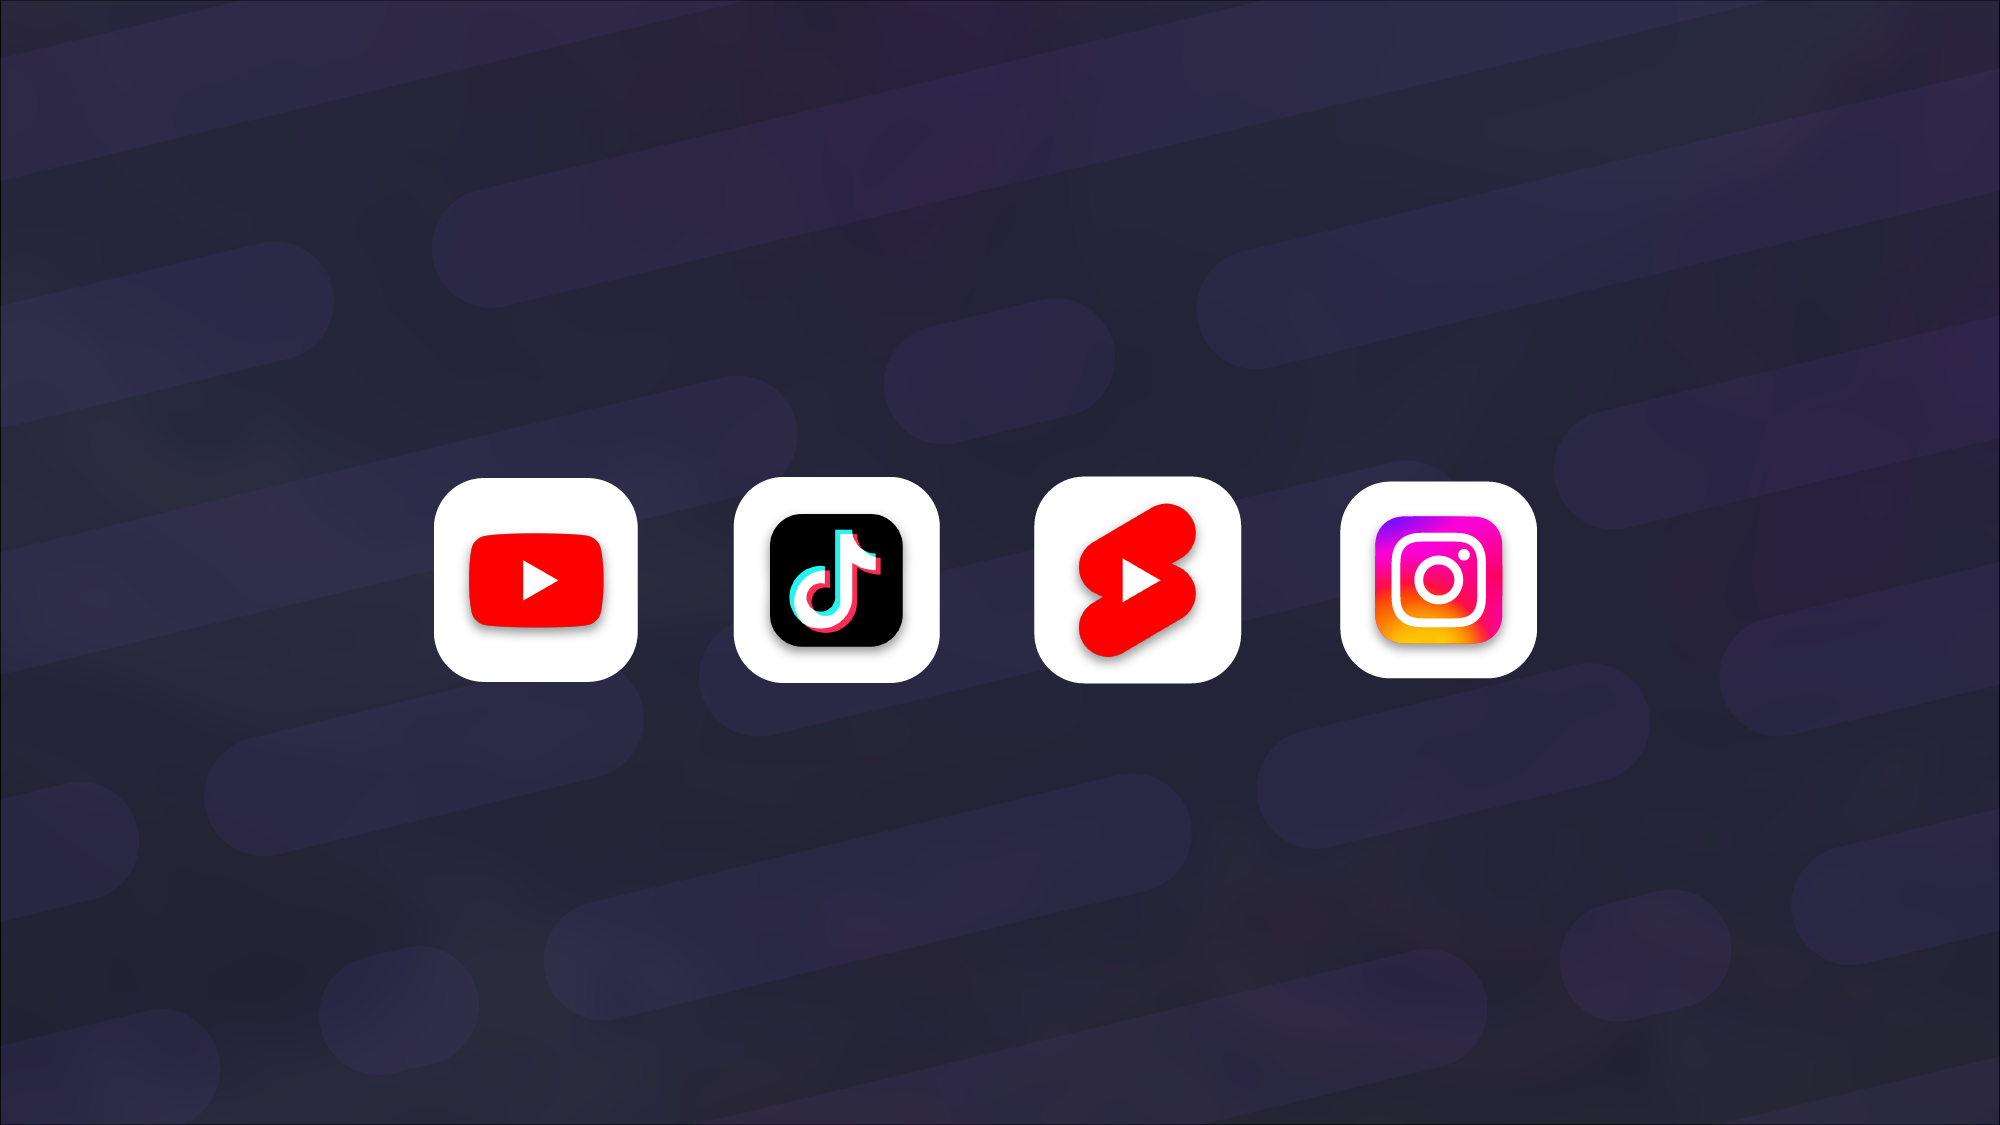 Which is best for discoverability? Youtube, TikTok, Youtube Shorts, or Instagram Reels?